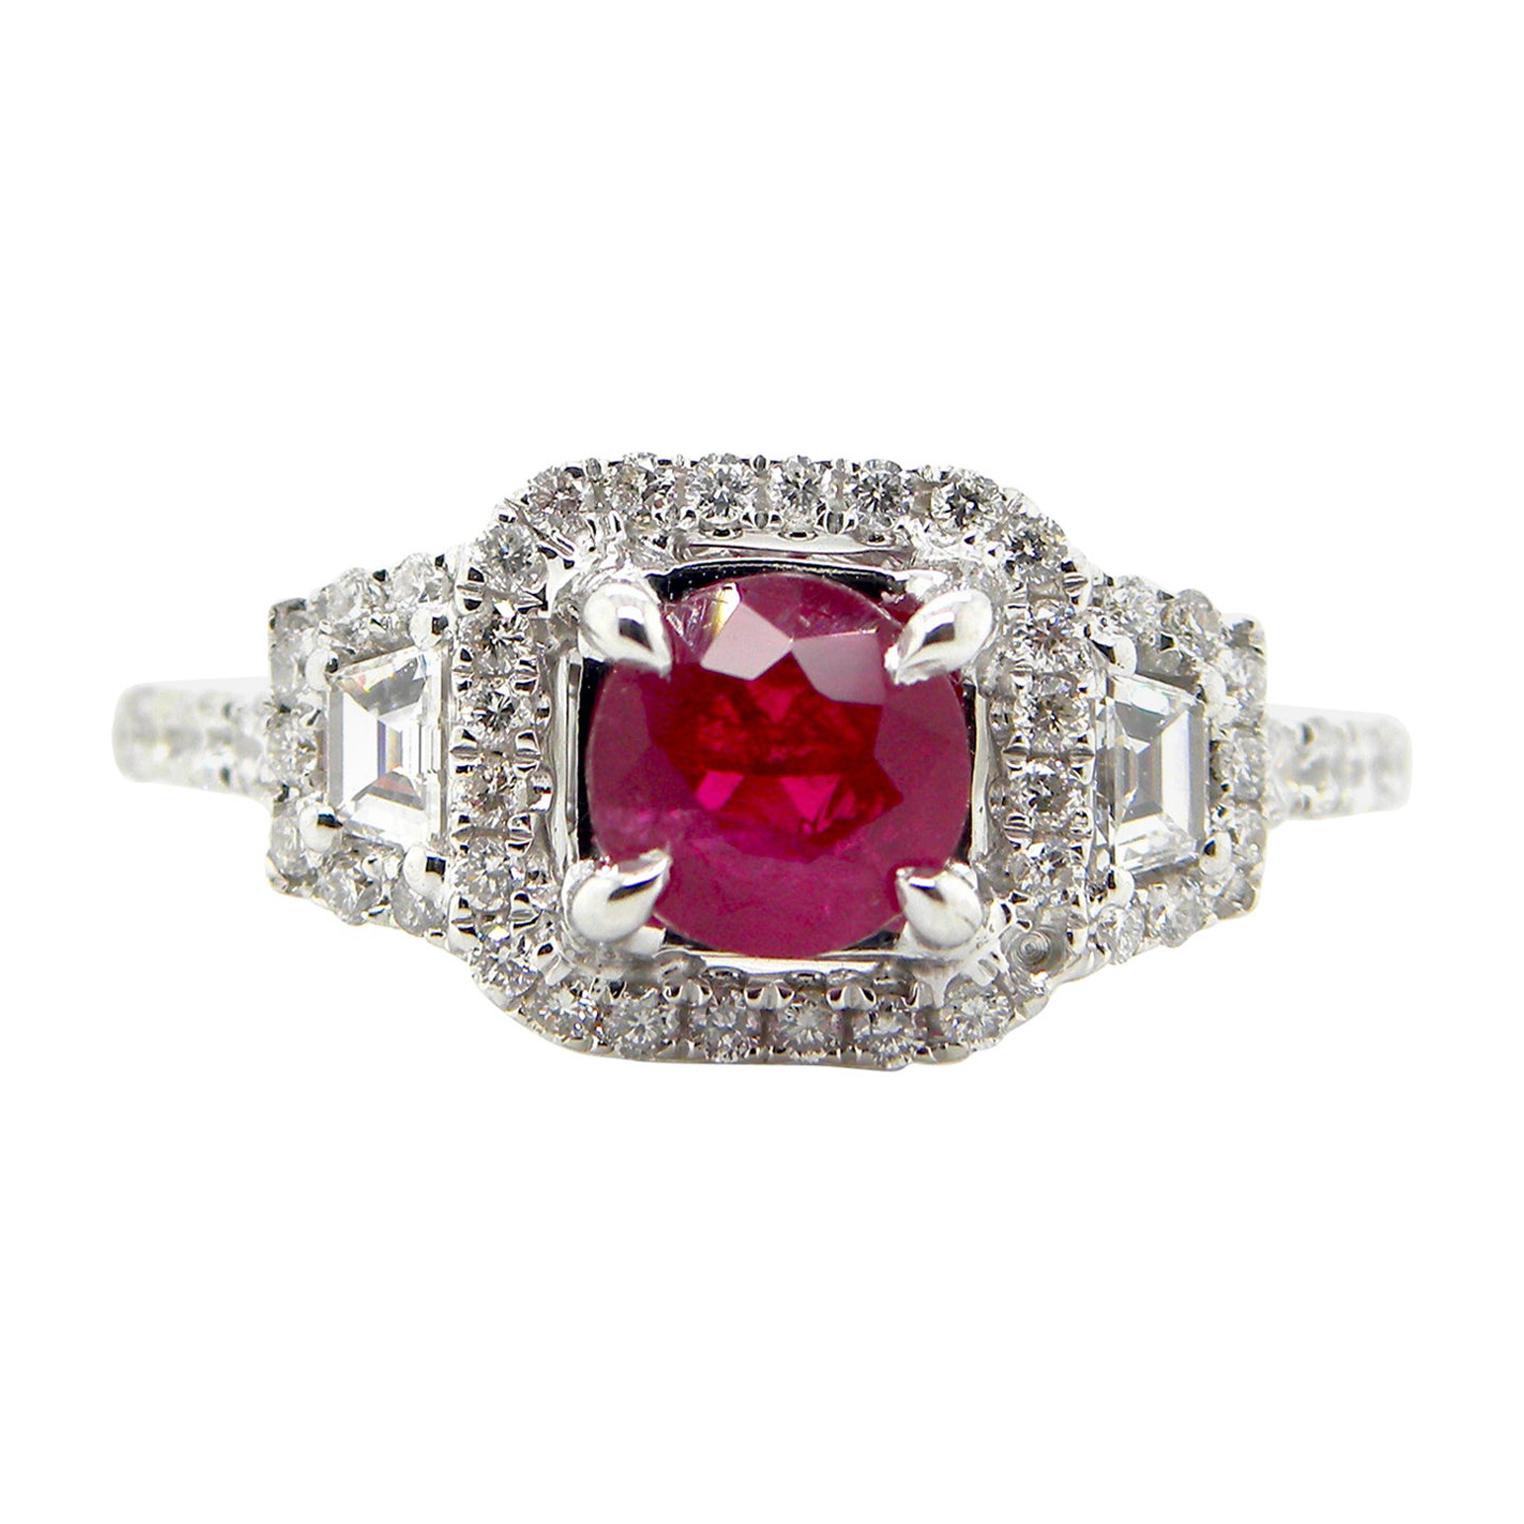 1.12 Carat GIA Certified Unheated Vivid Red Burmese Ruby and Diamond Gold Ring